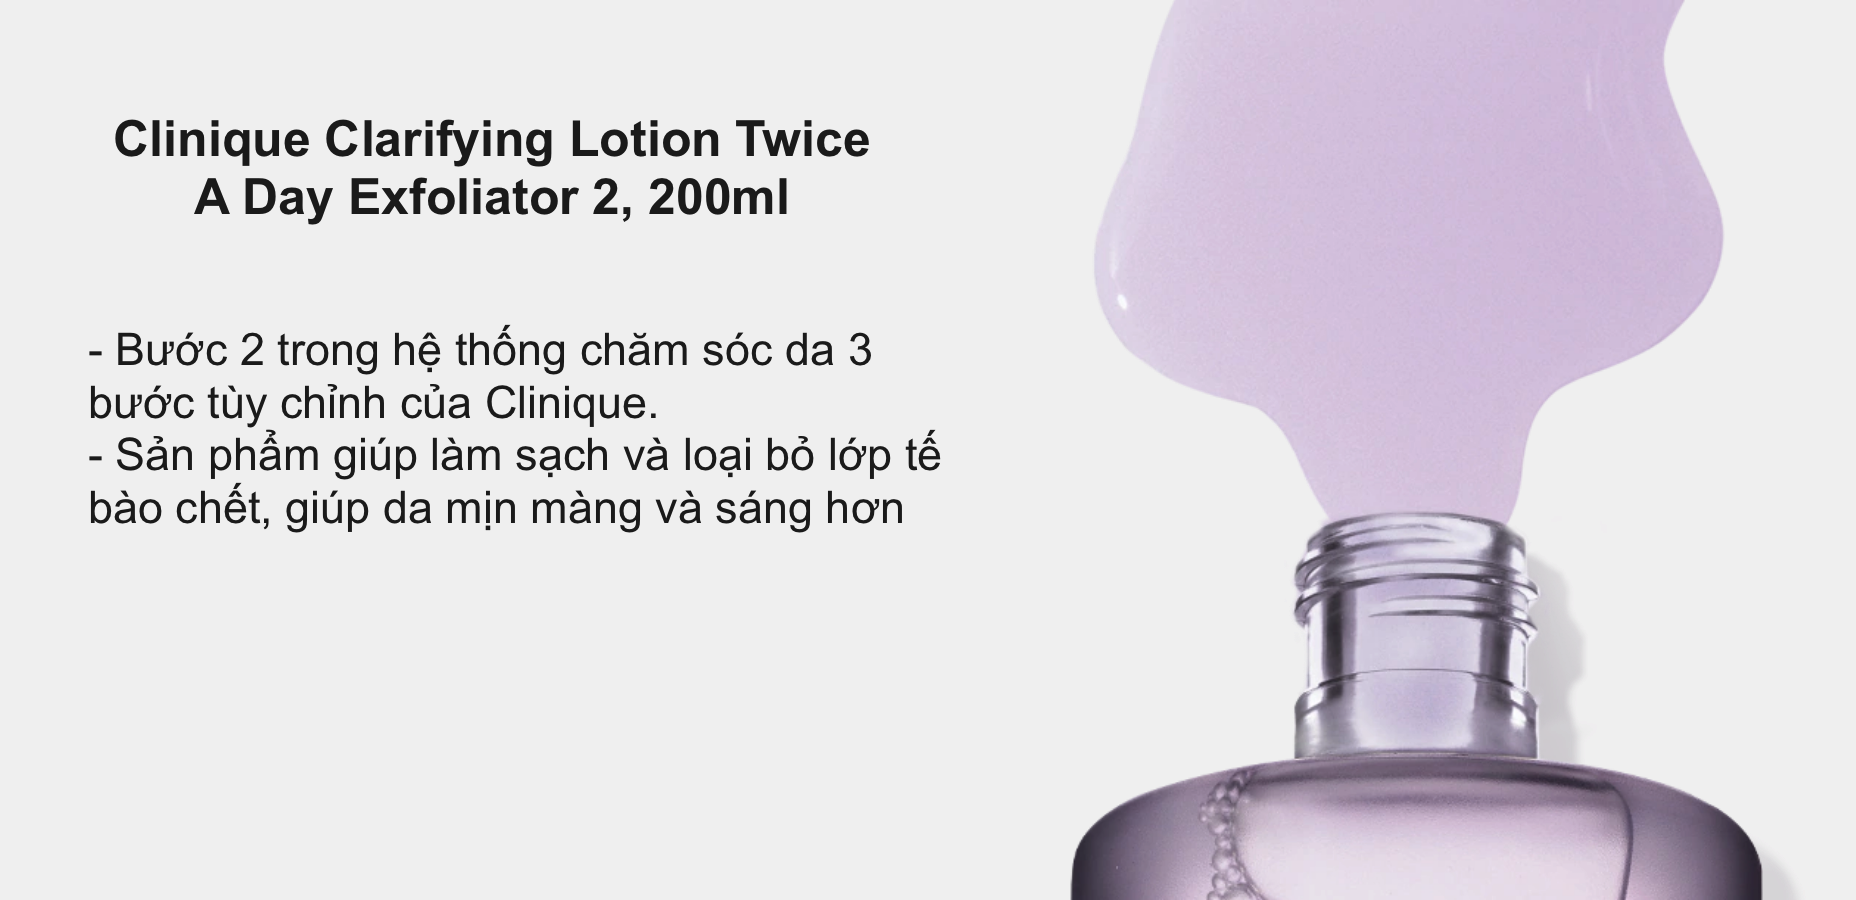 Clinique Clarifying Lotion Twice A Day Exfoliator 2, 200ml